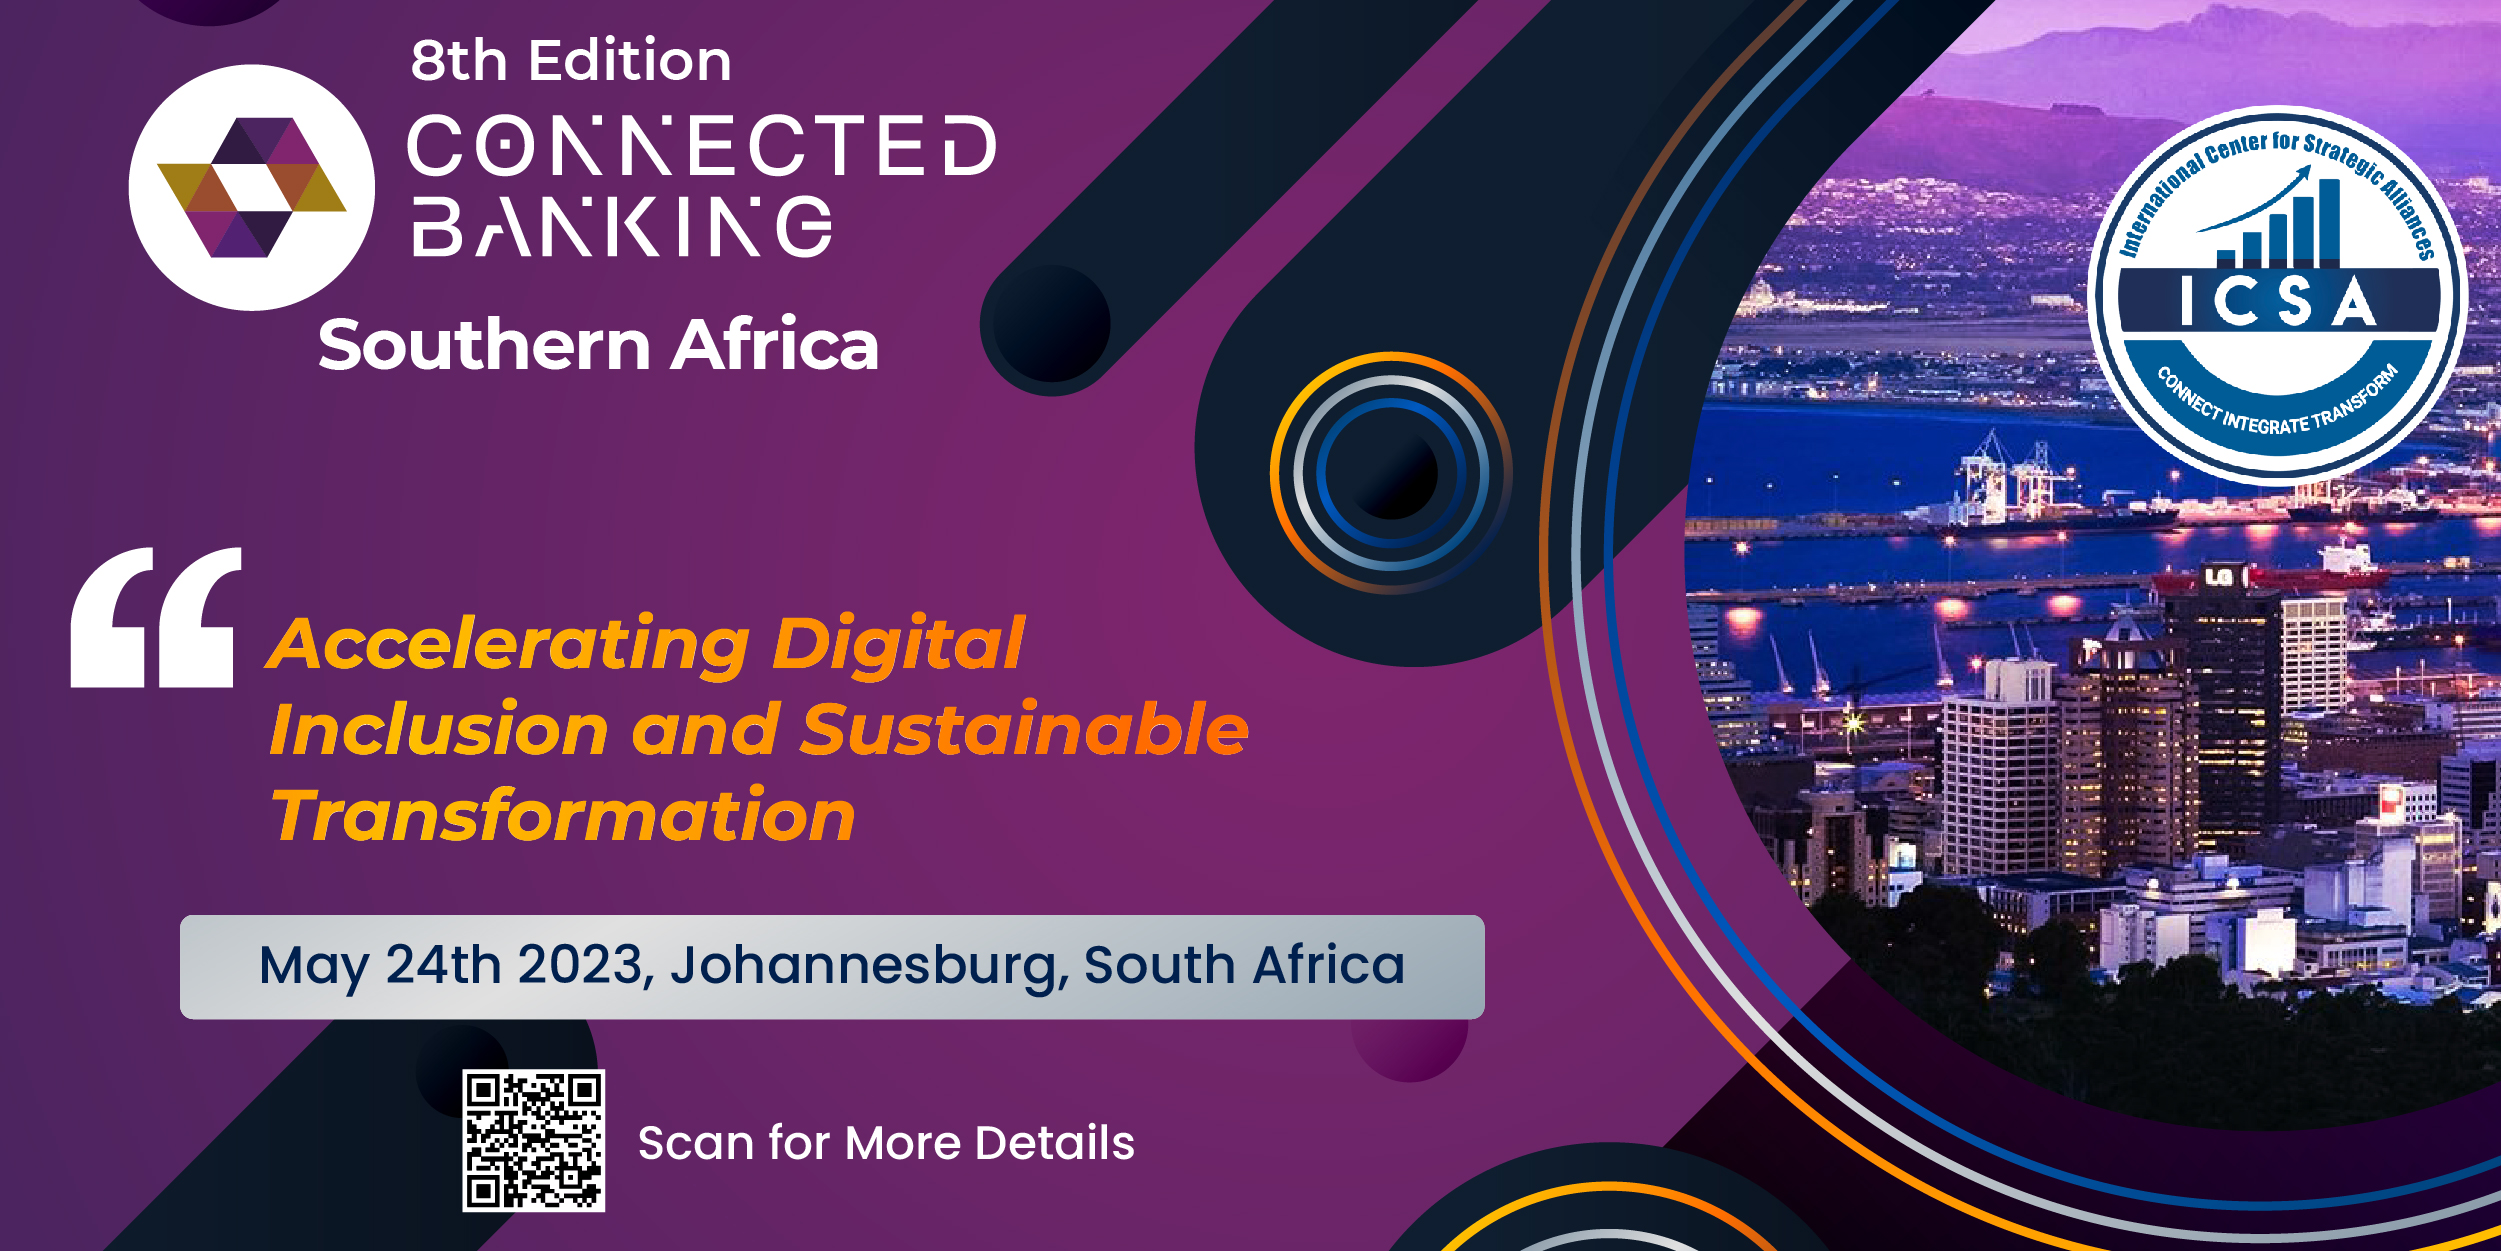 8th Edition Connected Banking Summit Southern Africa-Formerly Africa Digital Banking Summit-Innovation and Excellence Awards